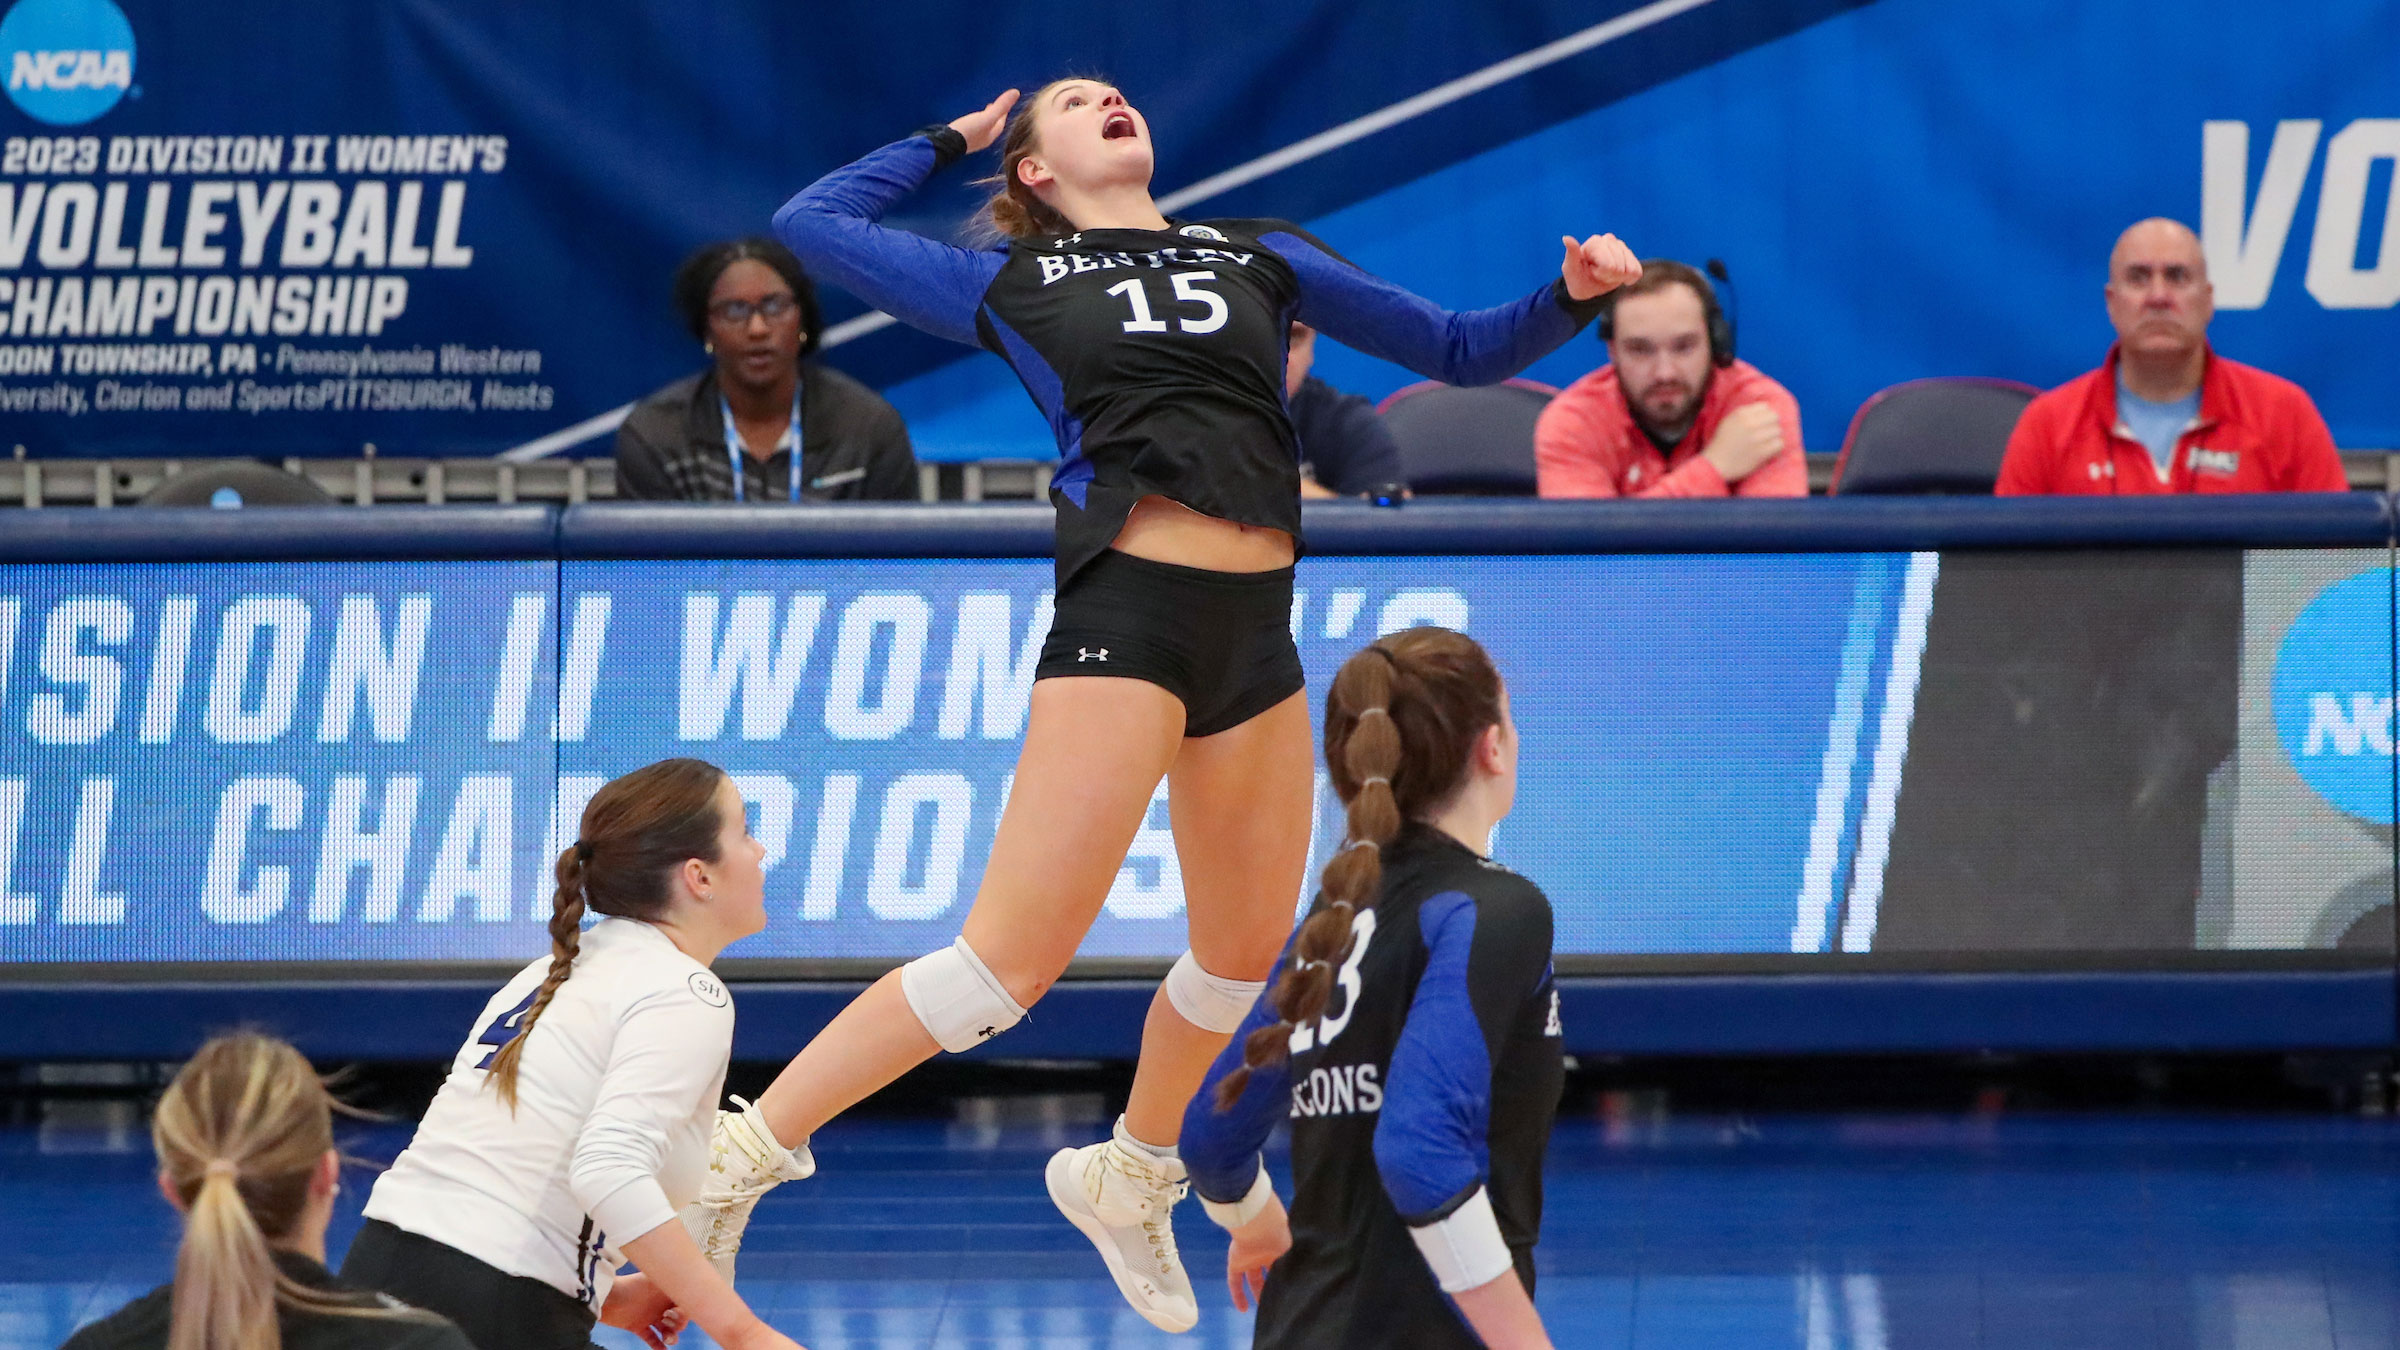 Vitko's match-high 15 kills not enough in Elite 8 match against Tampa